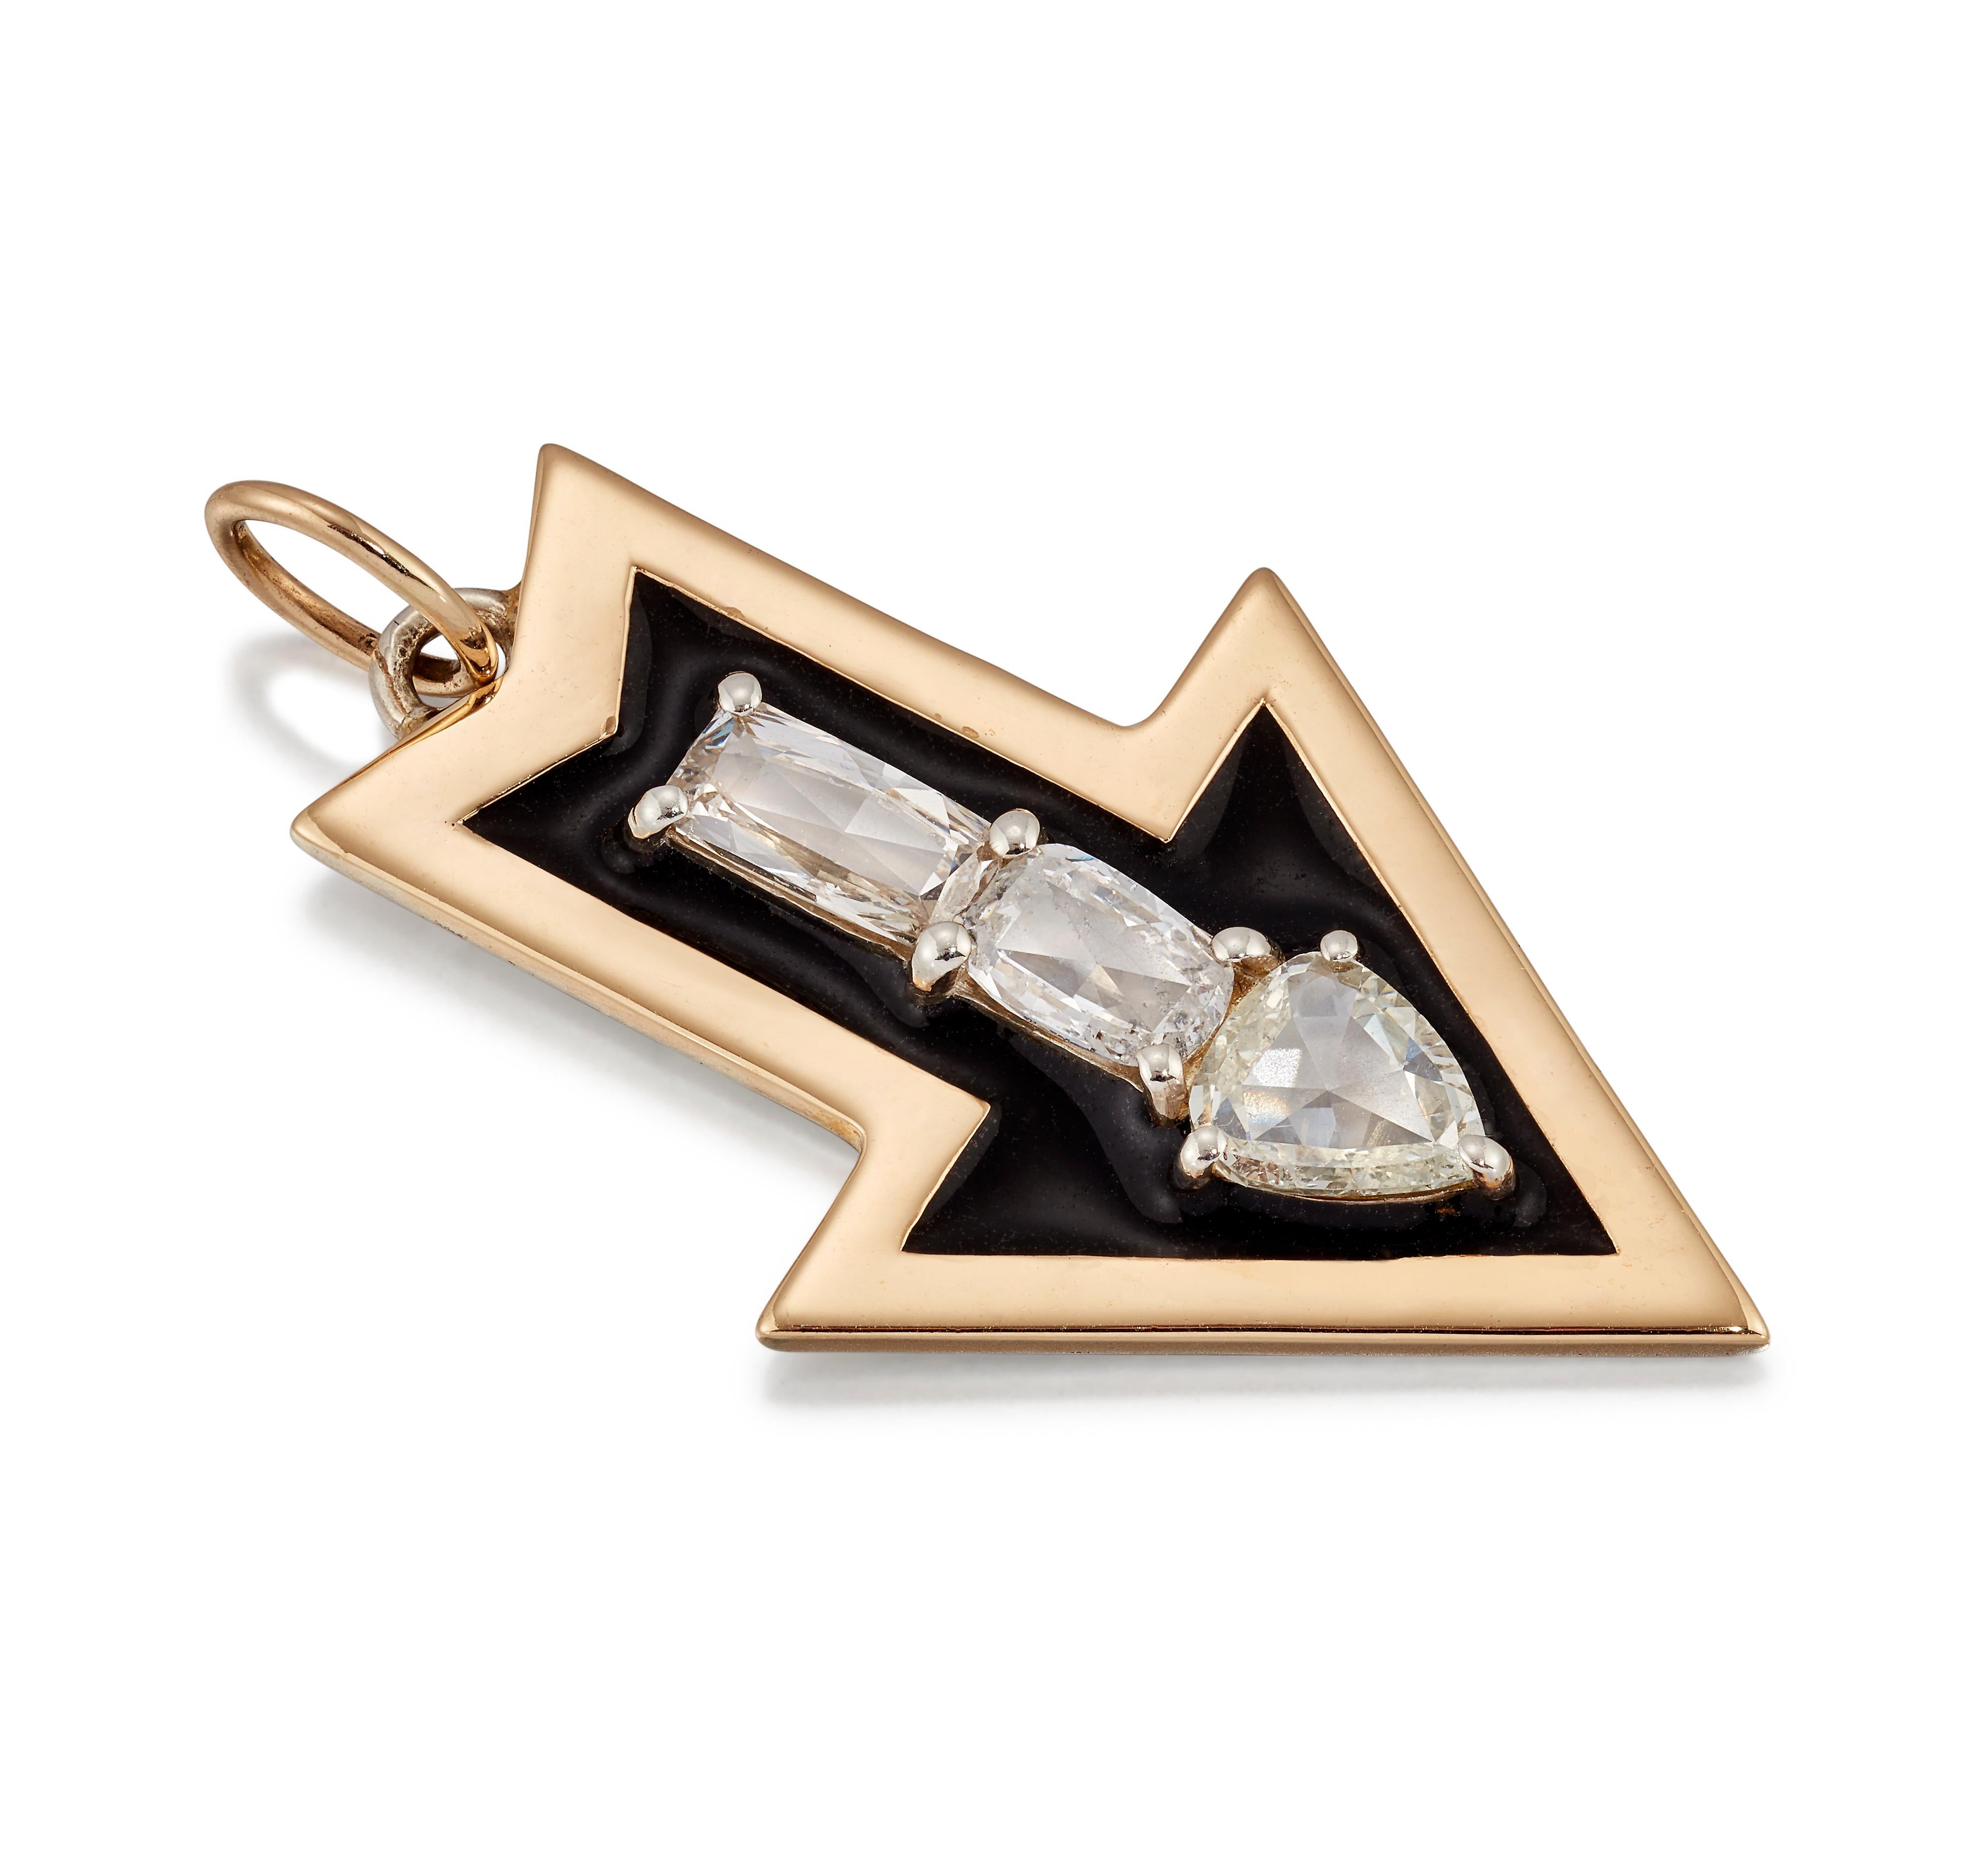 Beautiful Rose-cut Diamond and Black enamelled pendant.

Set with two elongated cushion shaped rose-cut Diamonds, to a triangular rose-cut diamond terminal, within a black enamelled border, mounted in Silver with an 18ct gold finish.